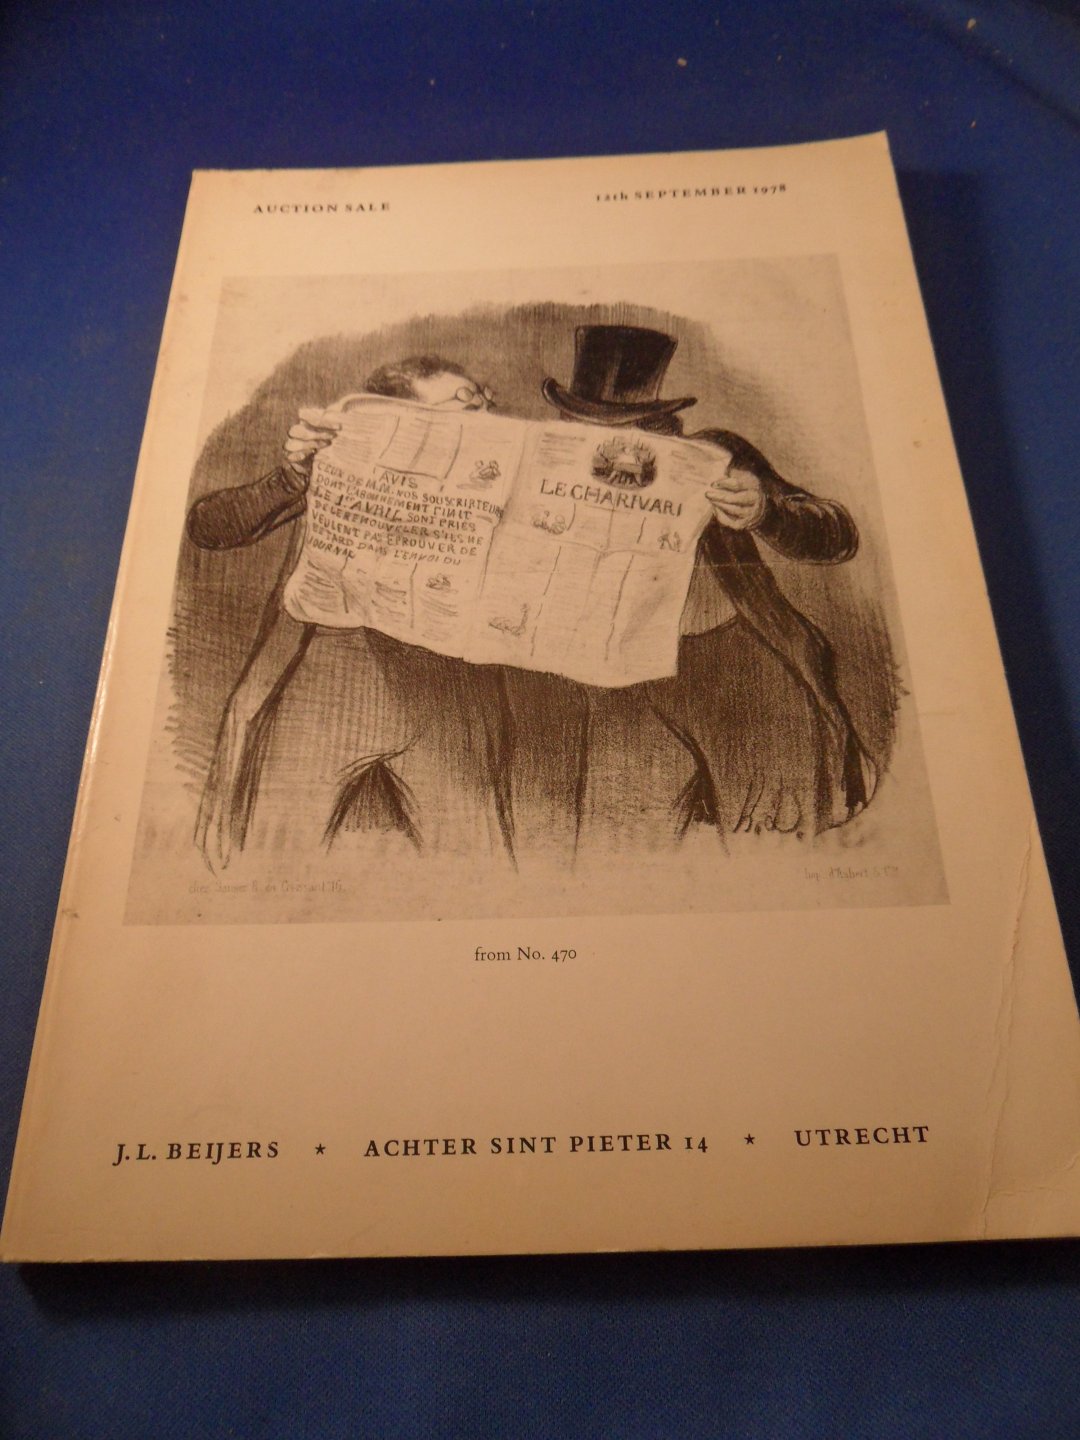 Beijers, J.L. - Auction sale 12th September 1978. Prints and drawings, including over 1.000 lithographs by Honoré Daumier